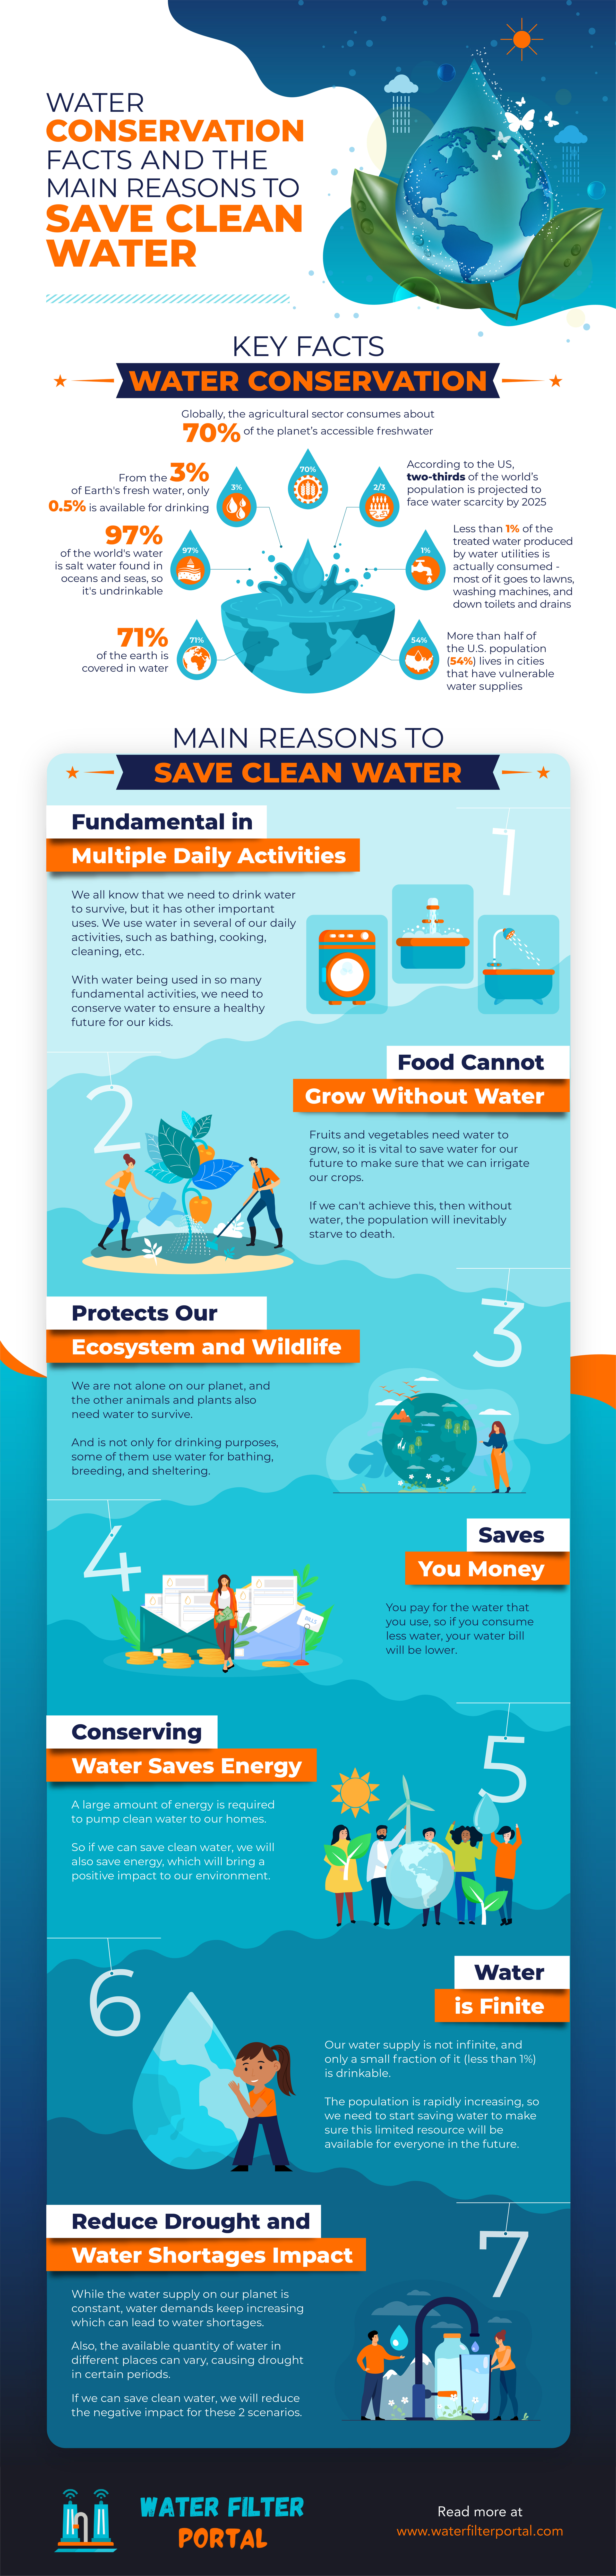 Infographic 1 - Water Conservation Facts and the Main Reasons to Save Clean Water